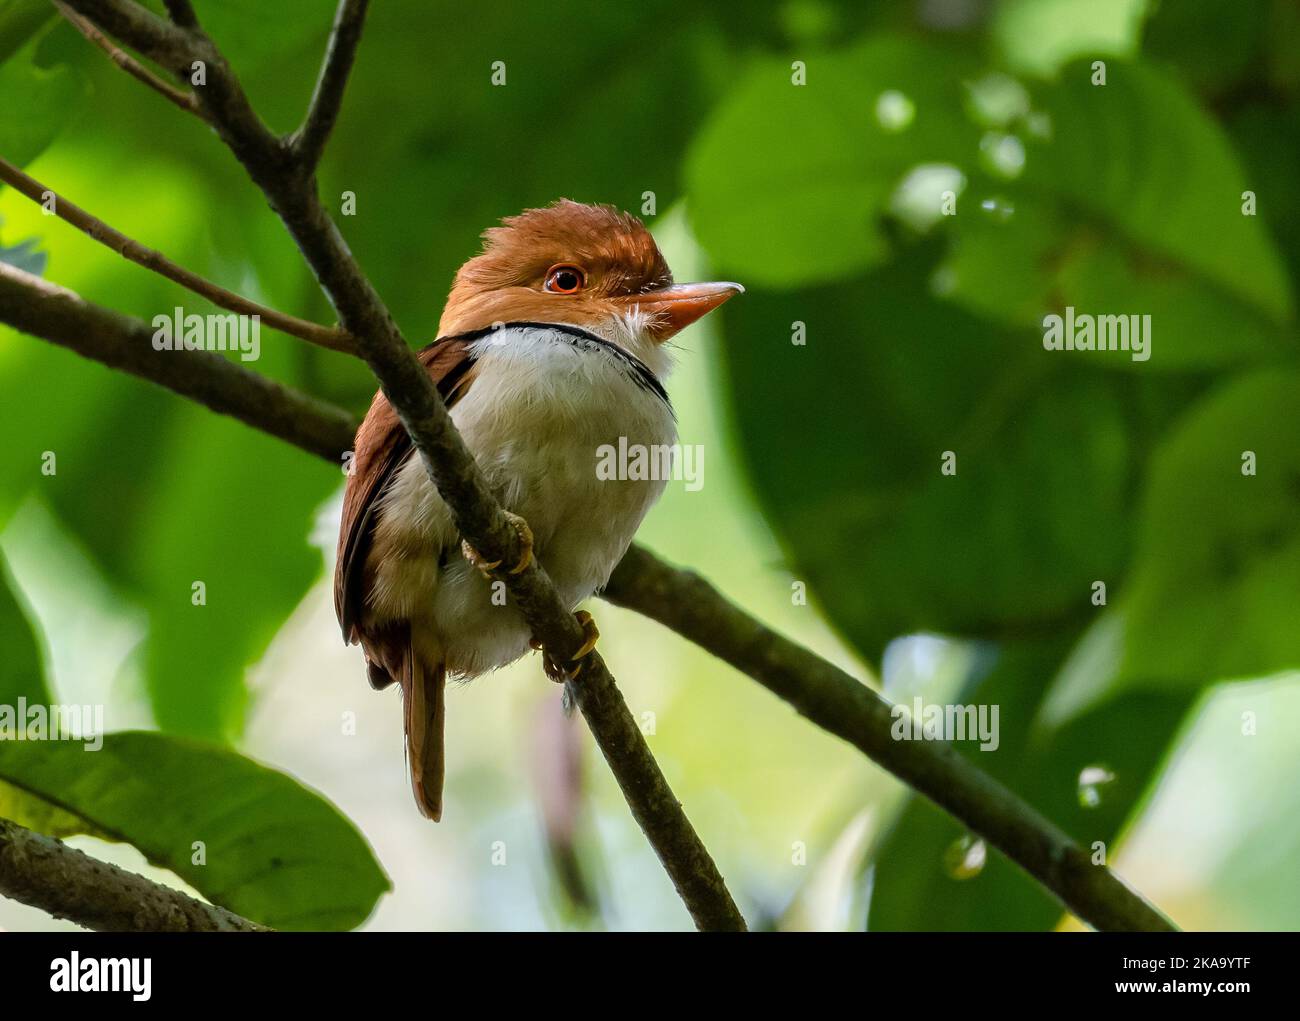 A Collared Puffbird (Bucco capensis) perched on a branch. Amazonia National Park, Pará State, Brazil. Stock Photo